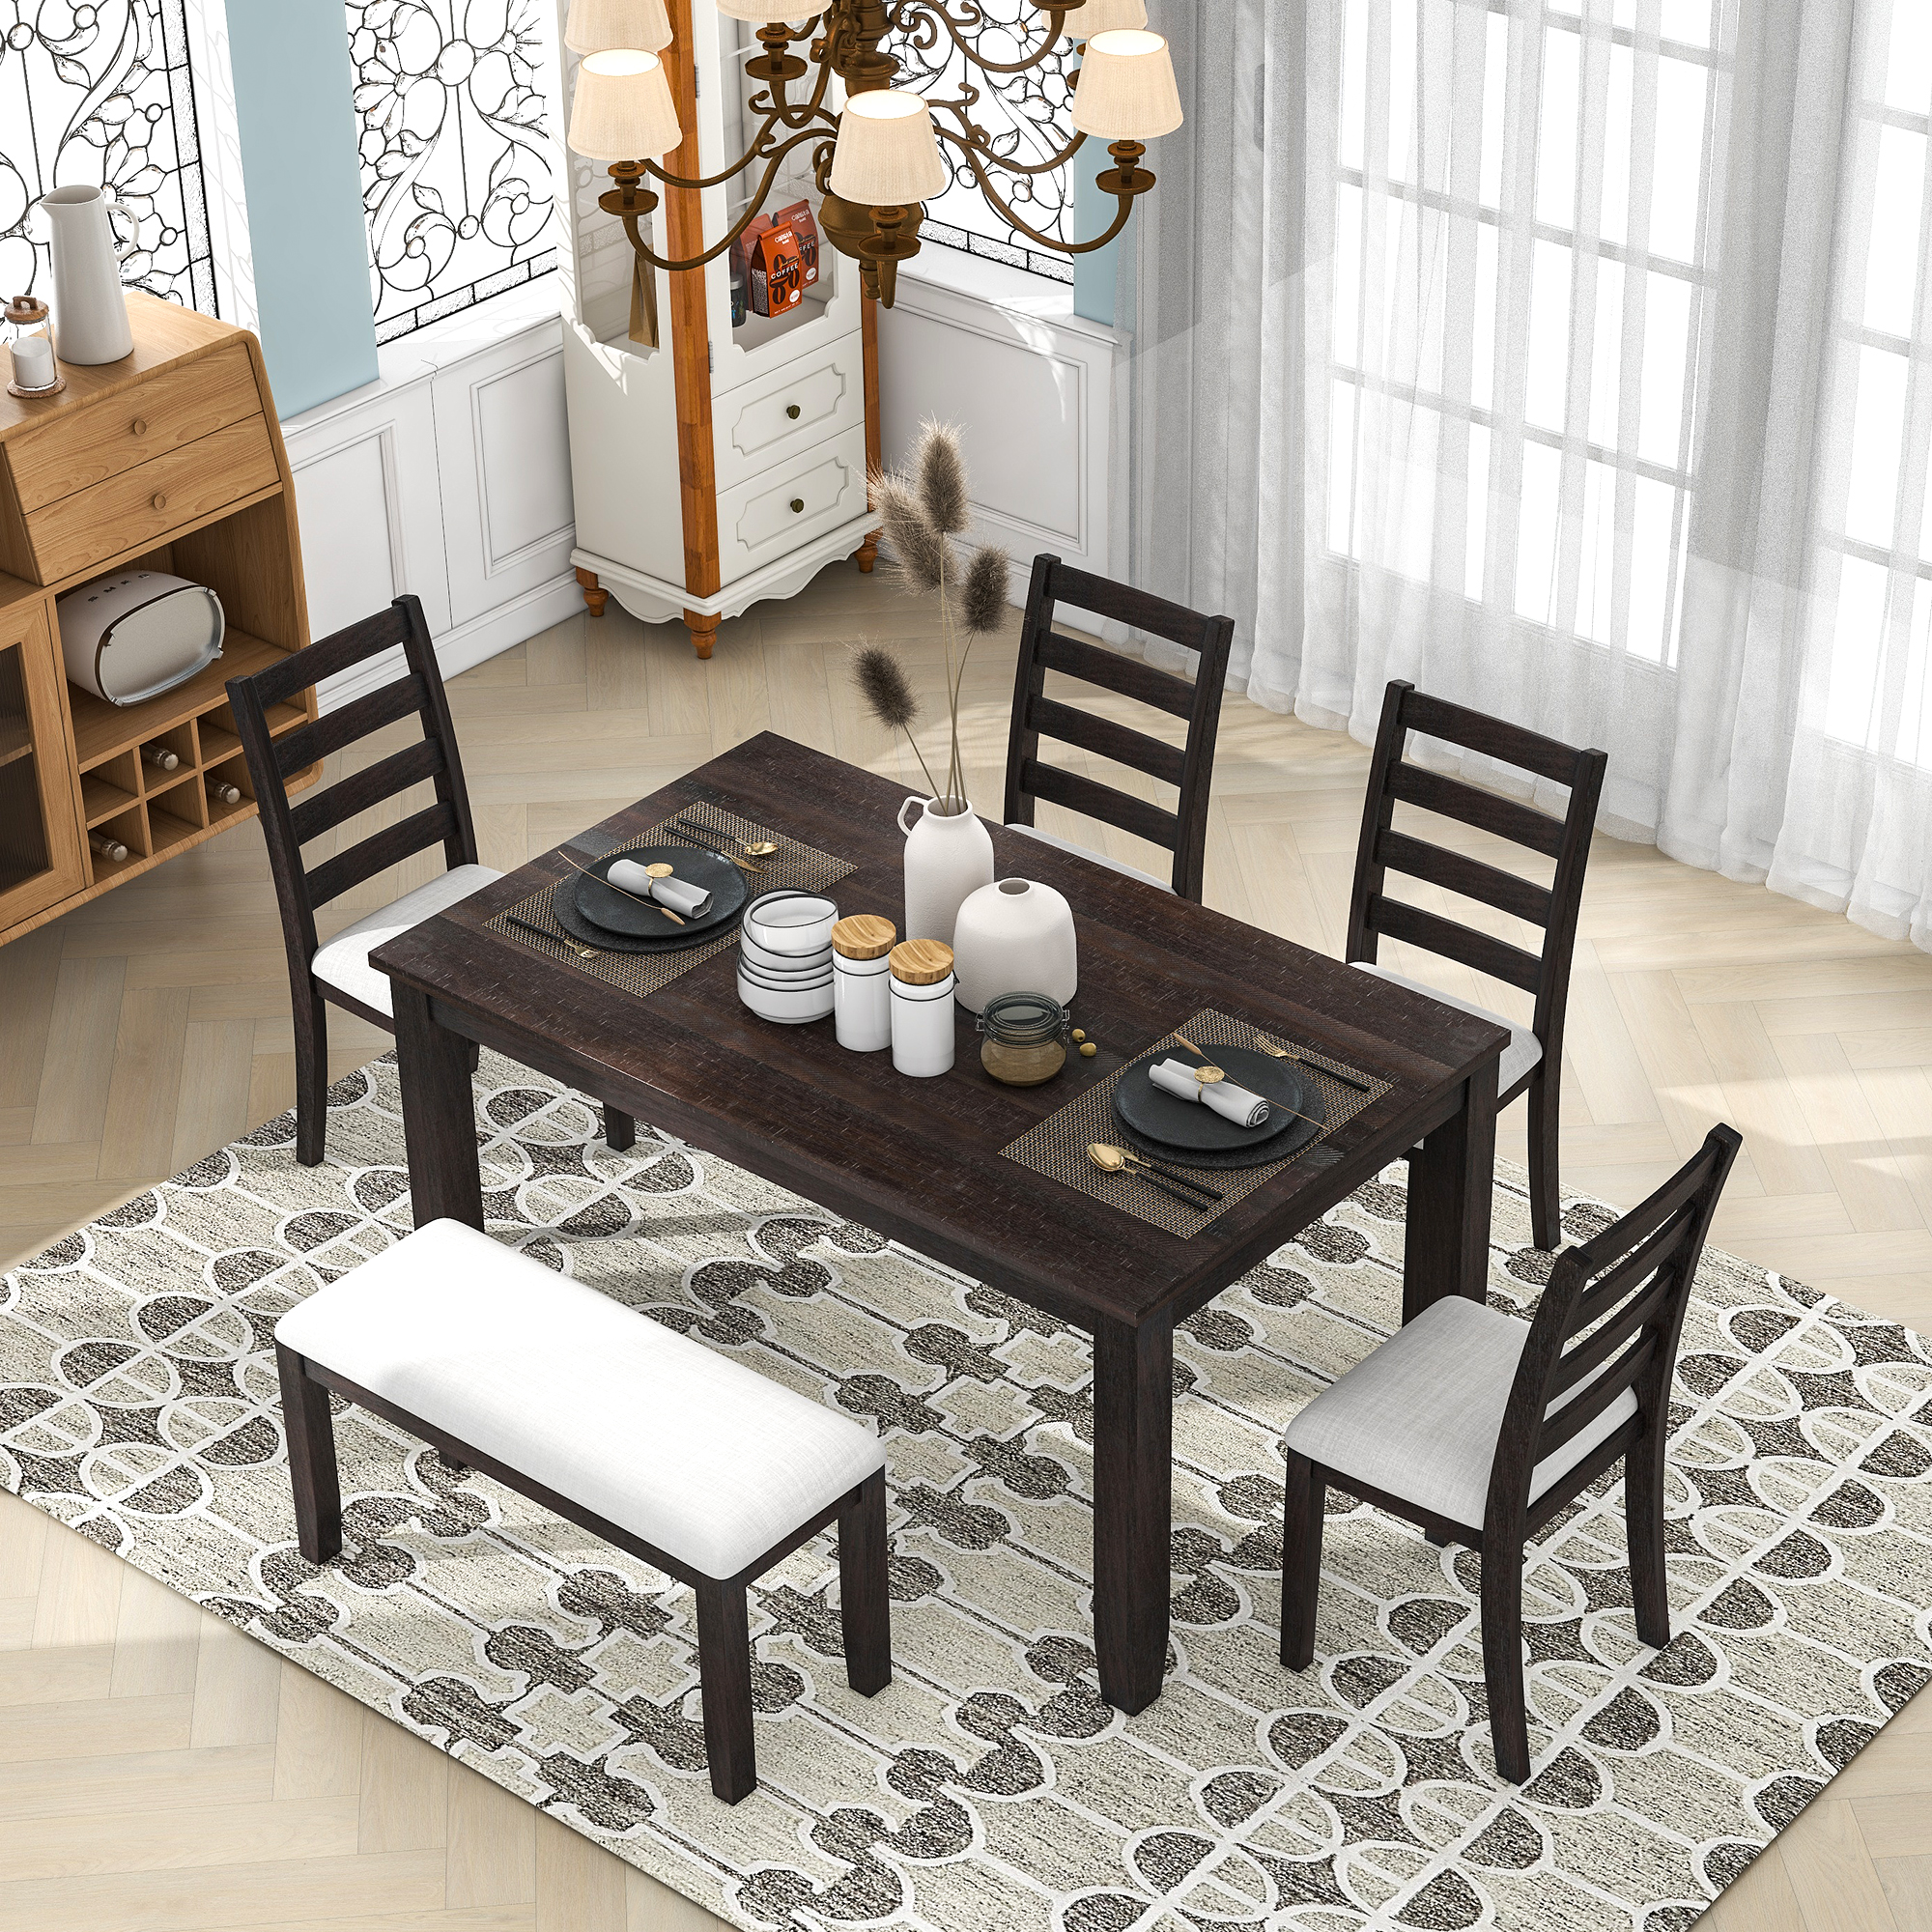 Rustic Style 6-Piece Dining Room Table Set - ST000042AAP